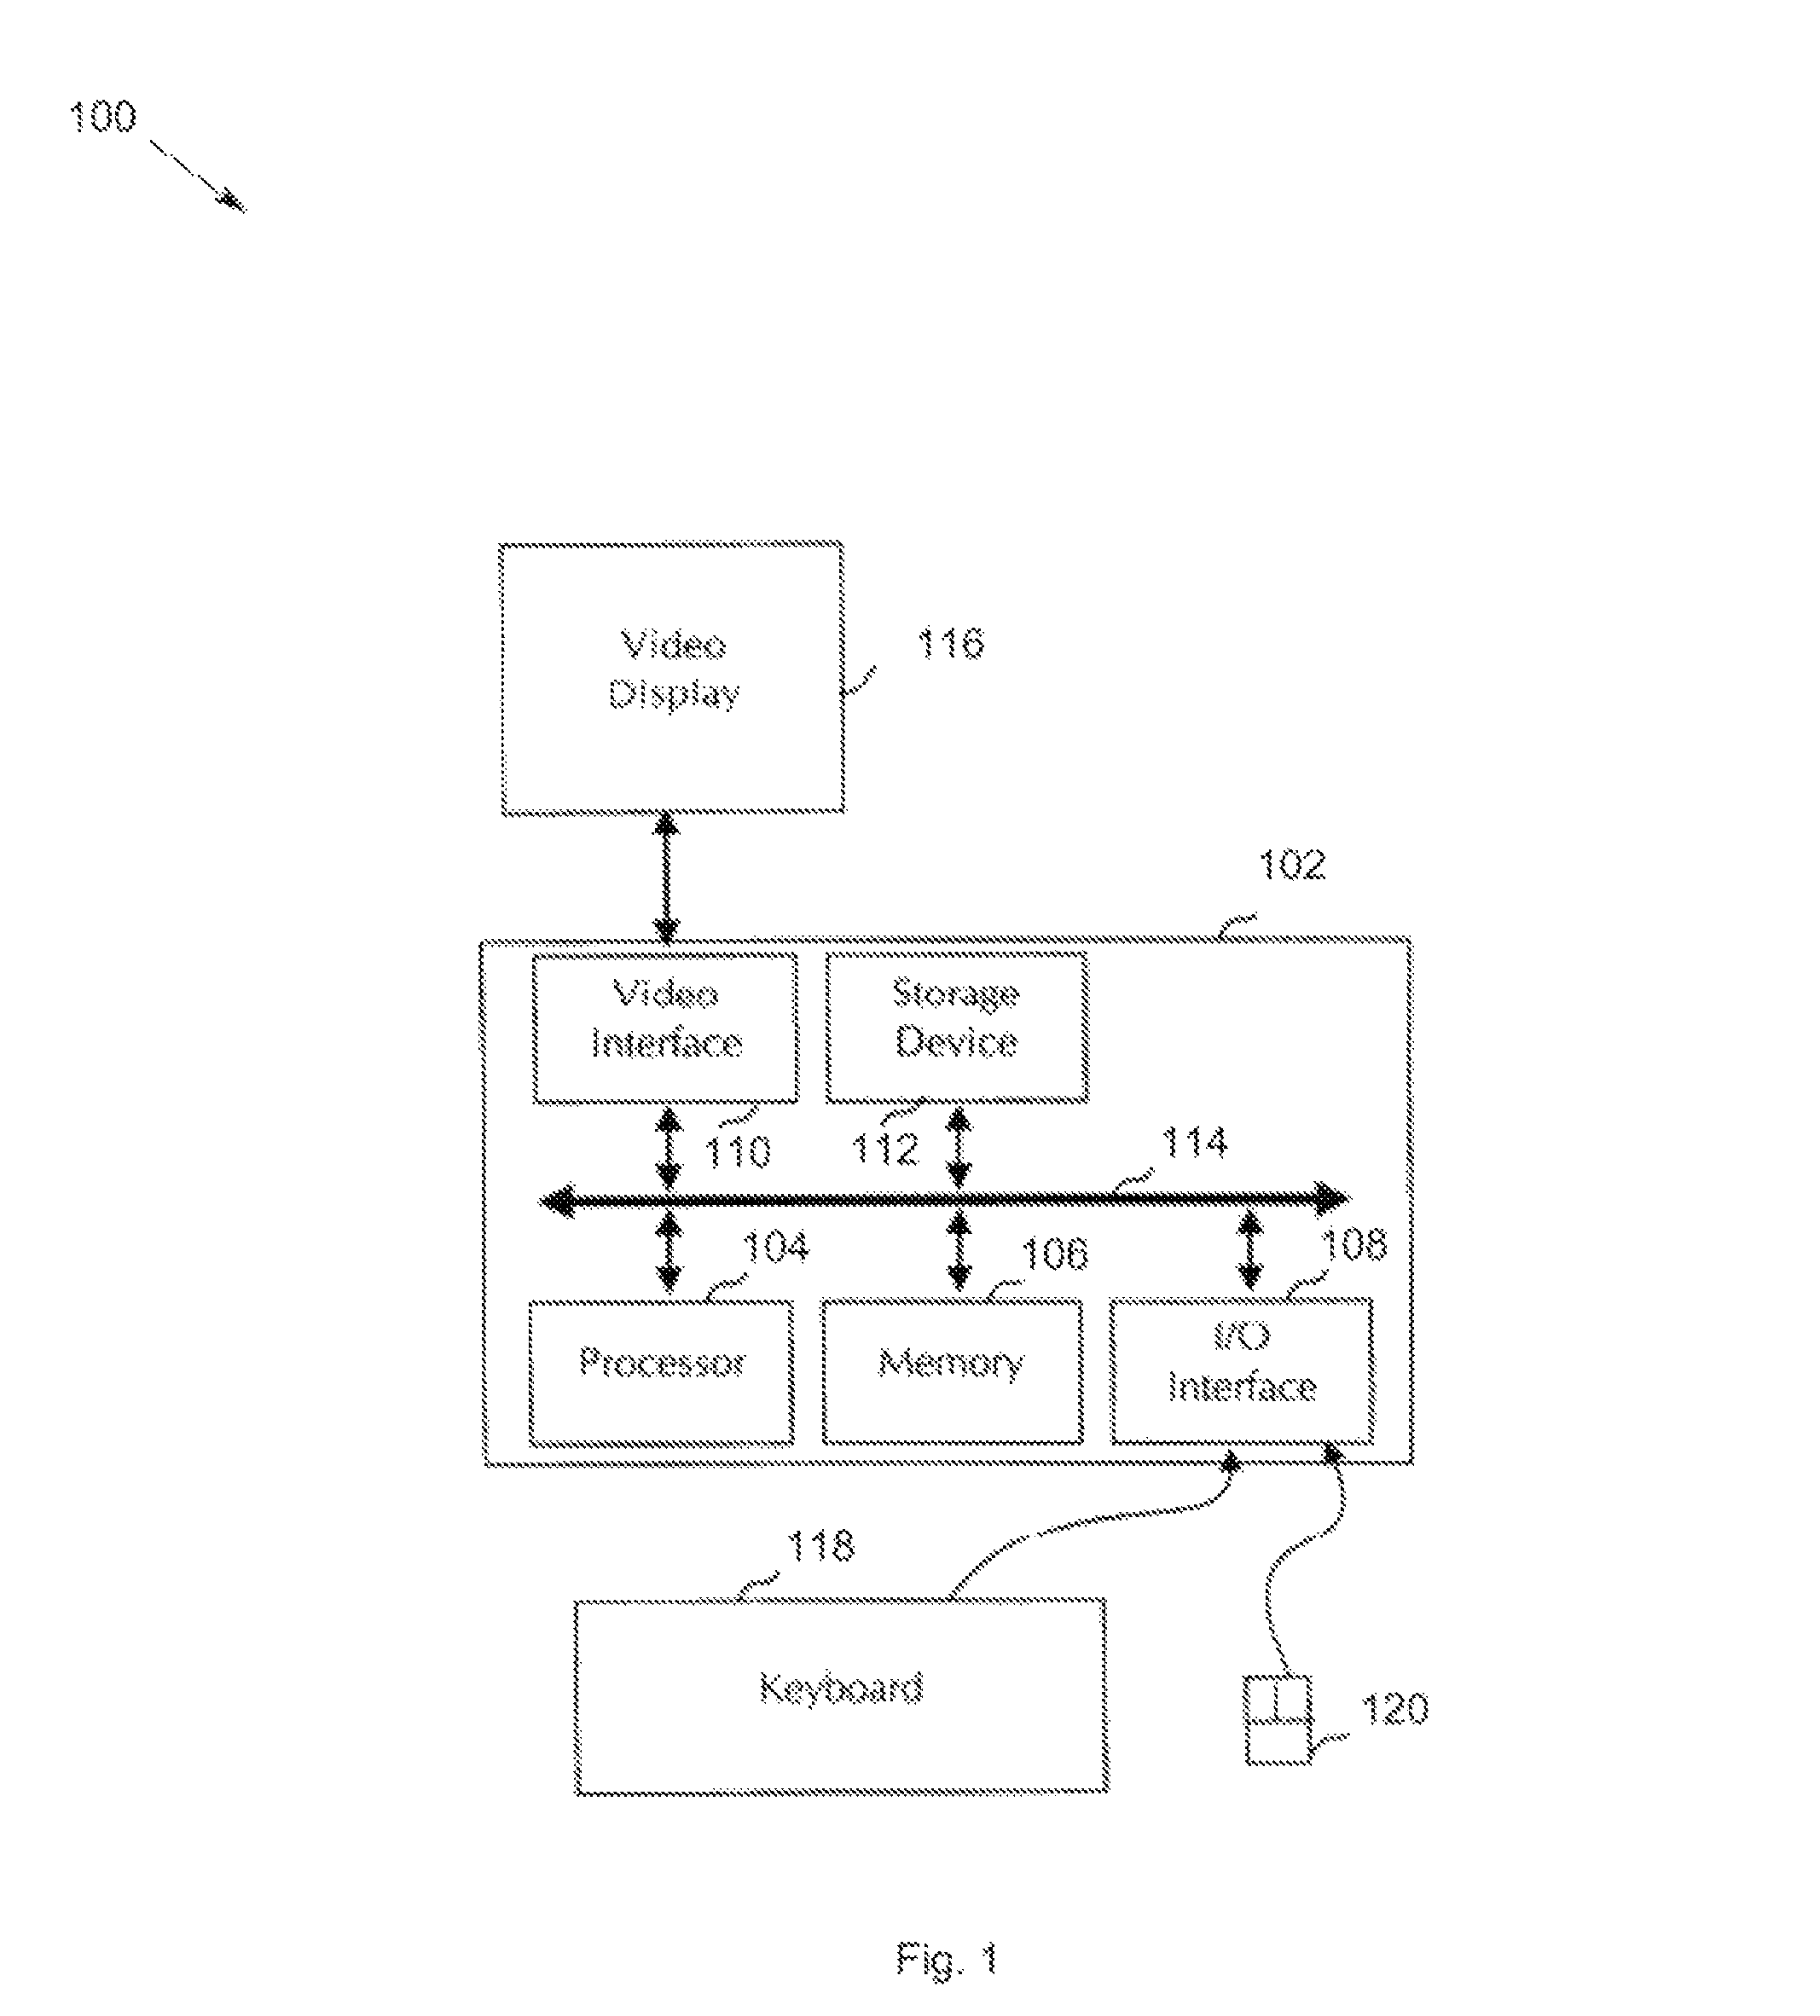 Method, apparatus and program storage device for providing customizable, immediate and radiating menus for accessing applications and actions